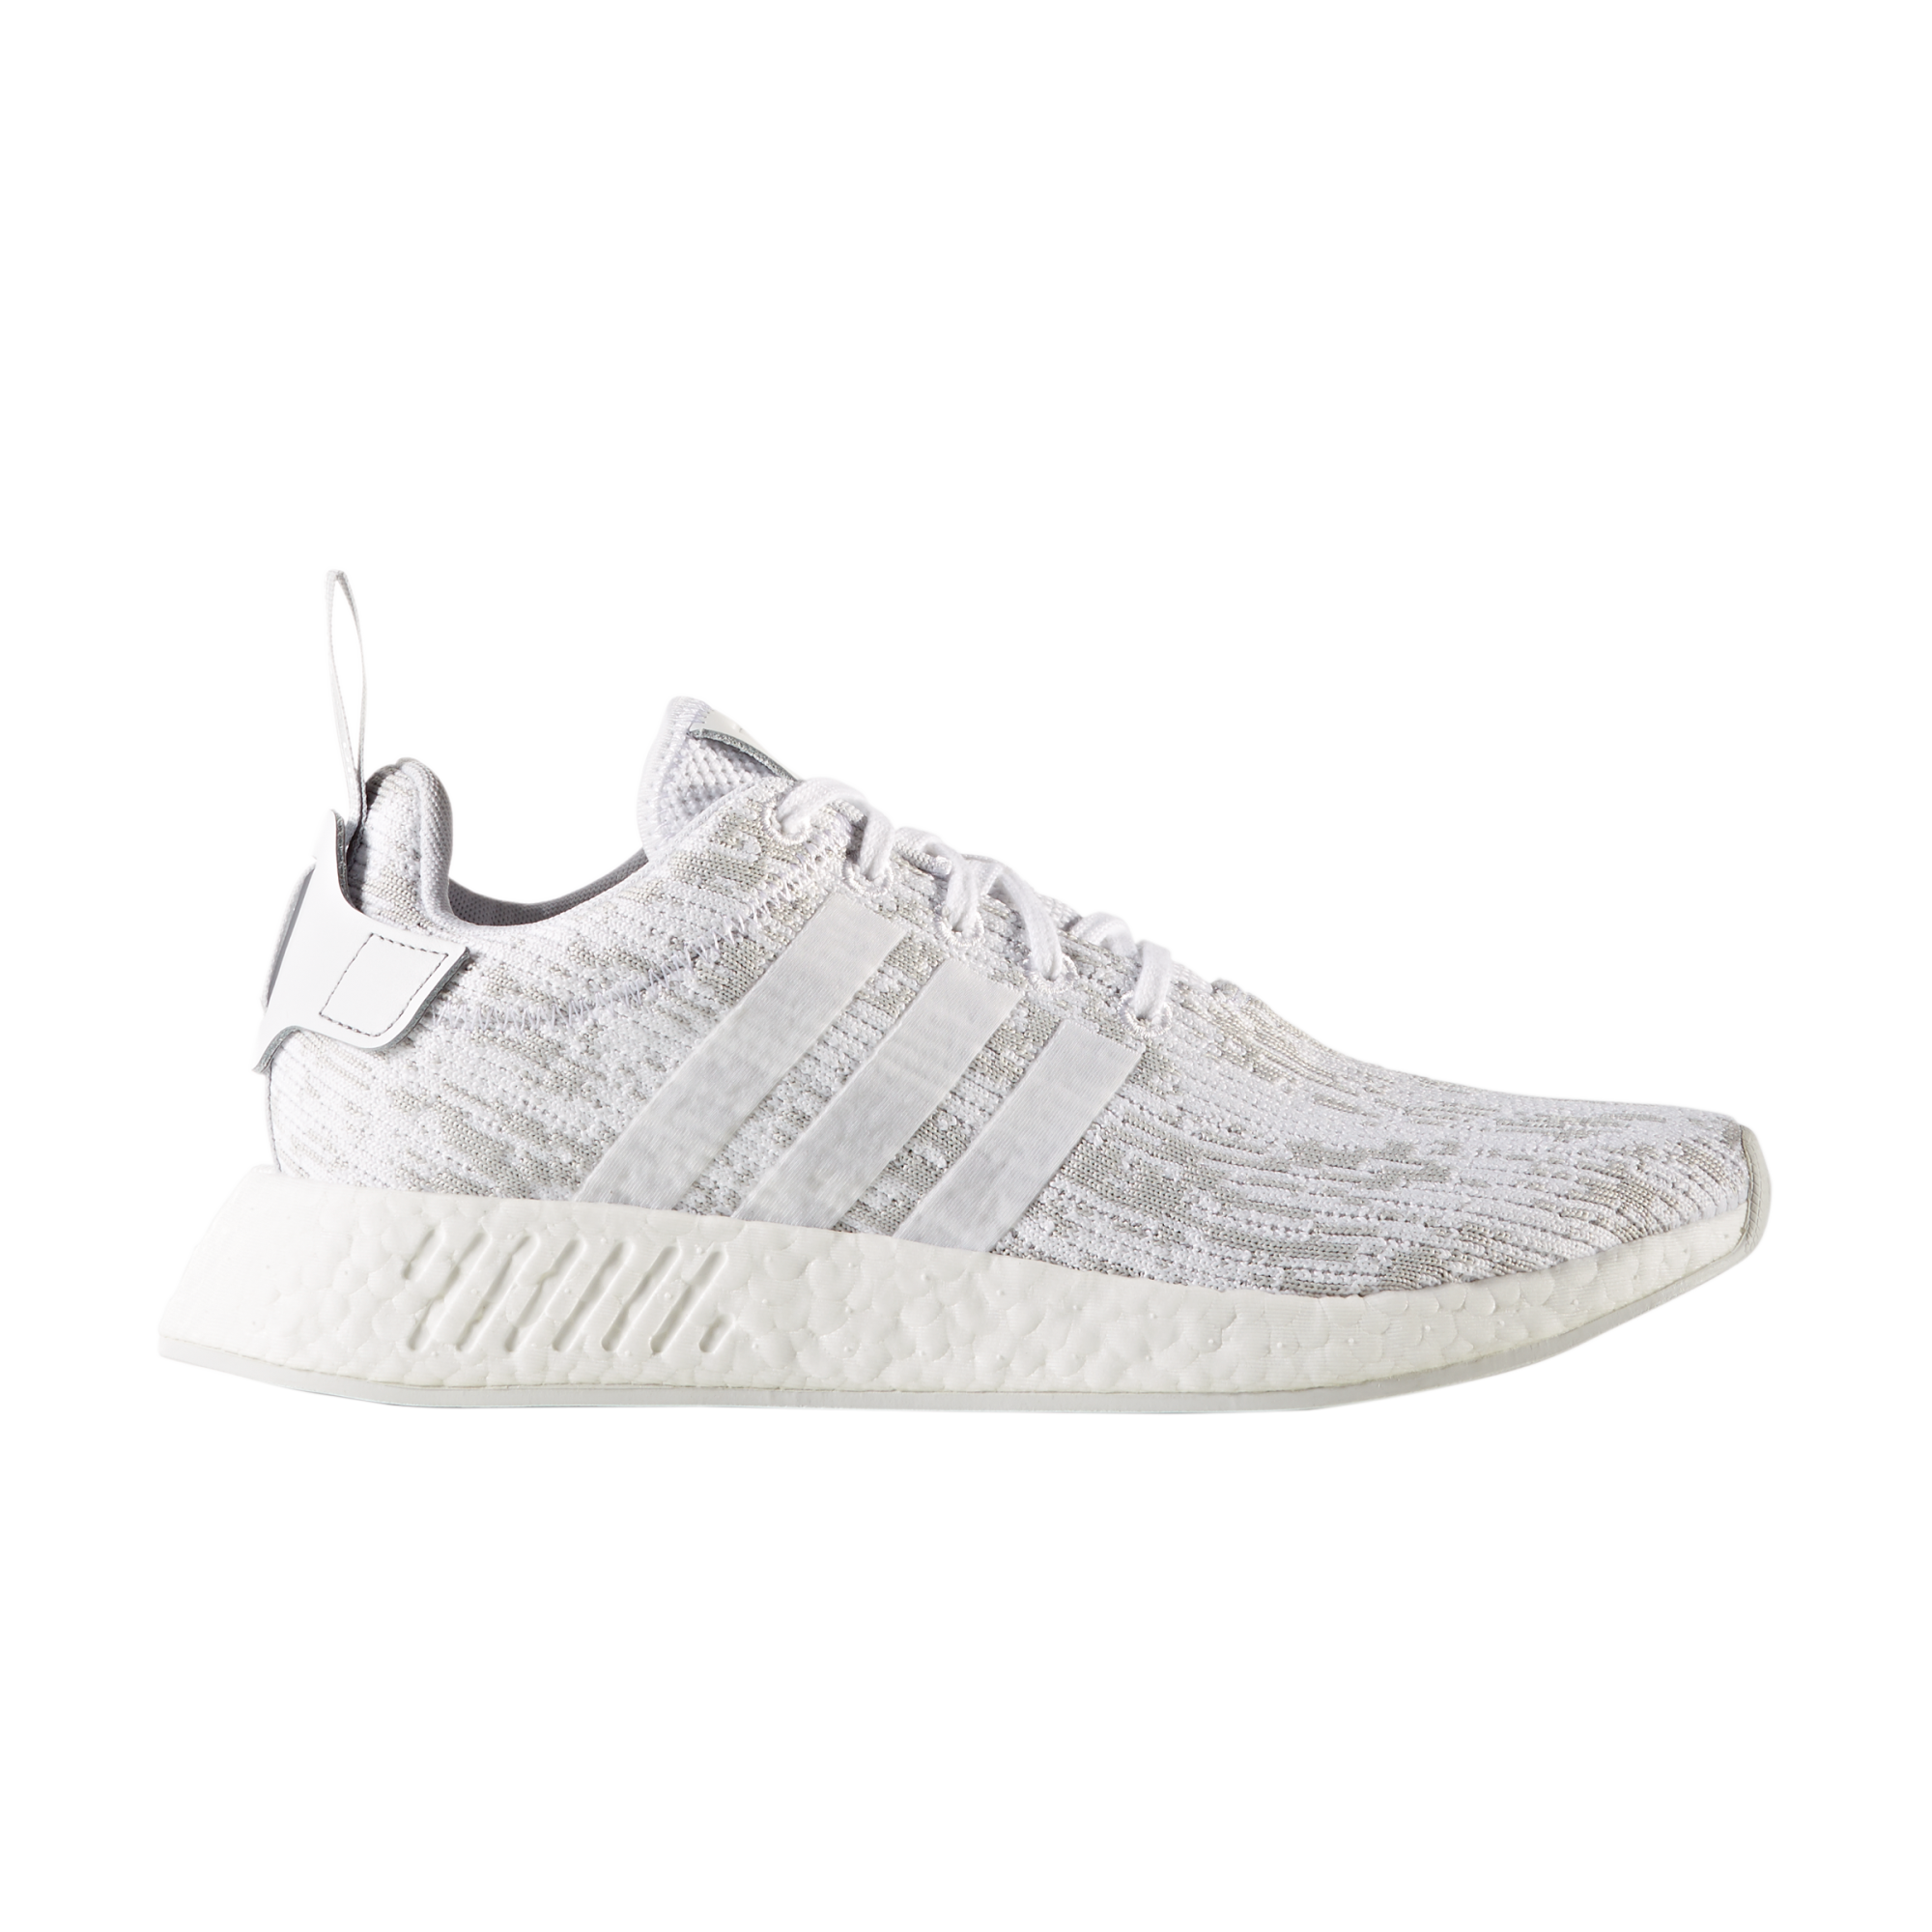 adidas women's nmd r2 casual sneakers